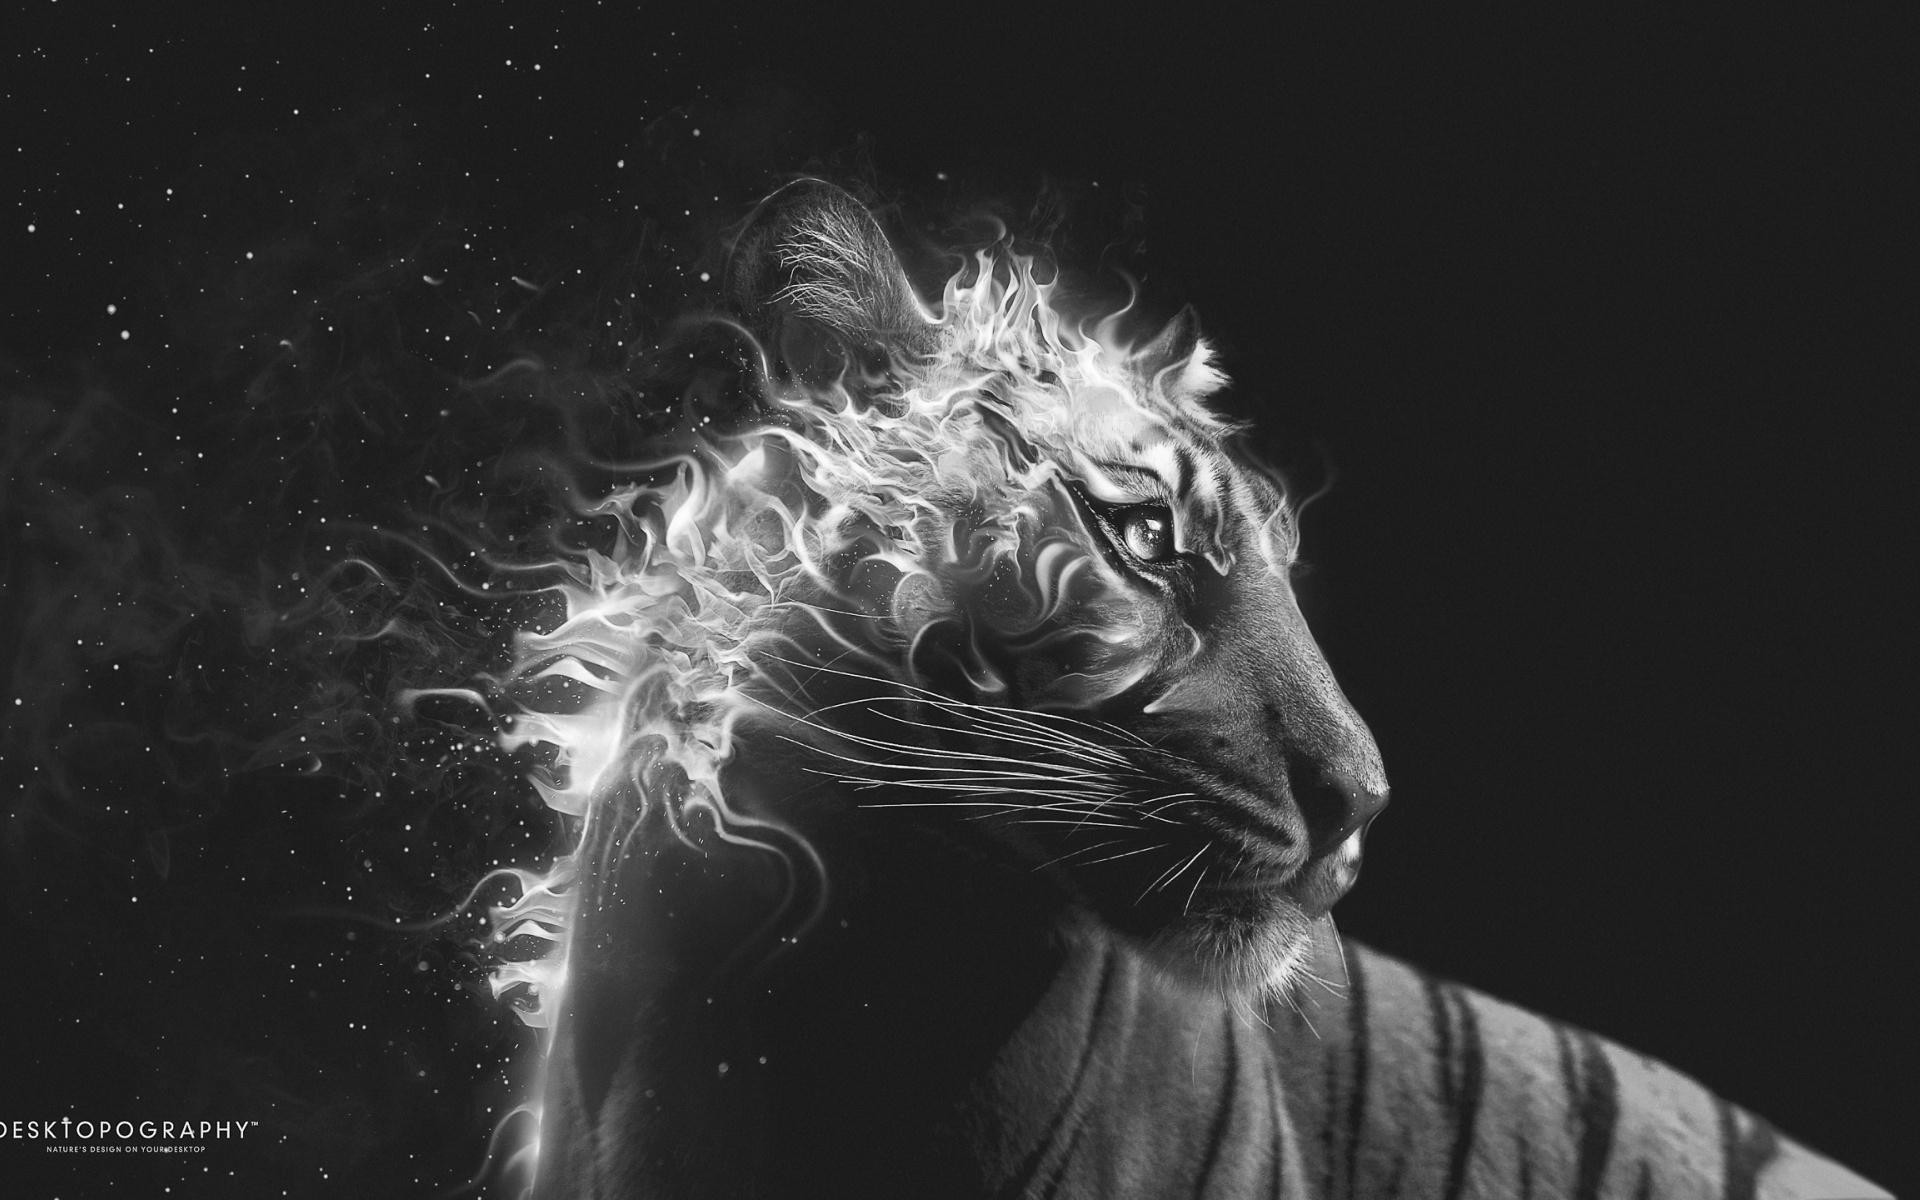 1920x1200 Tiger Head On Fire Black Background Animal Fantasy HD wallpaper for free